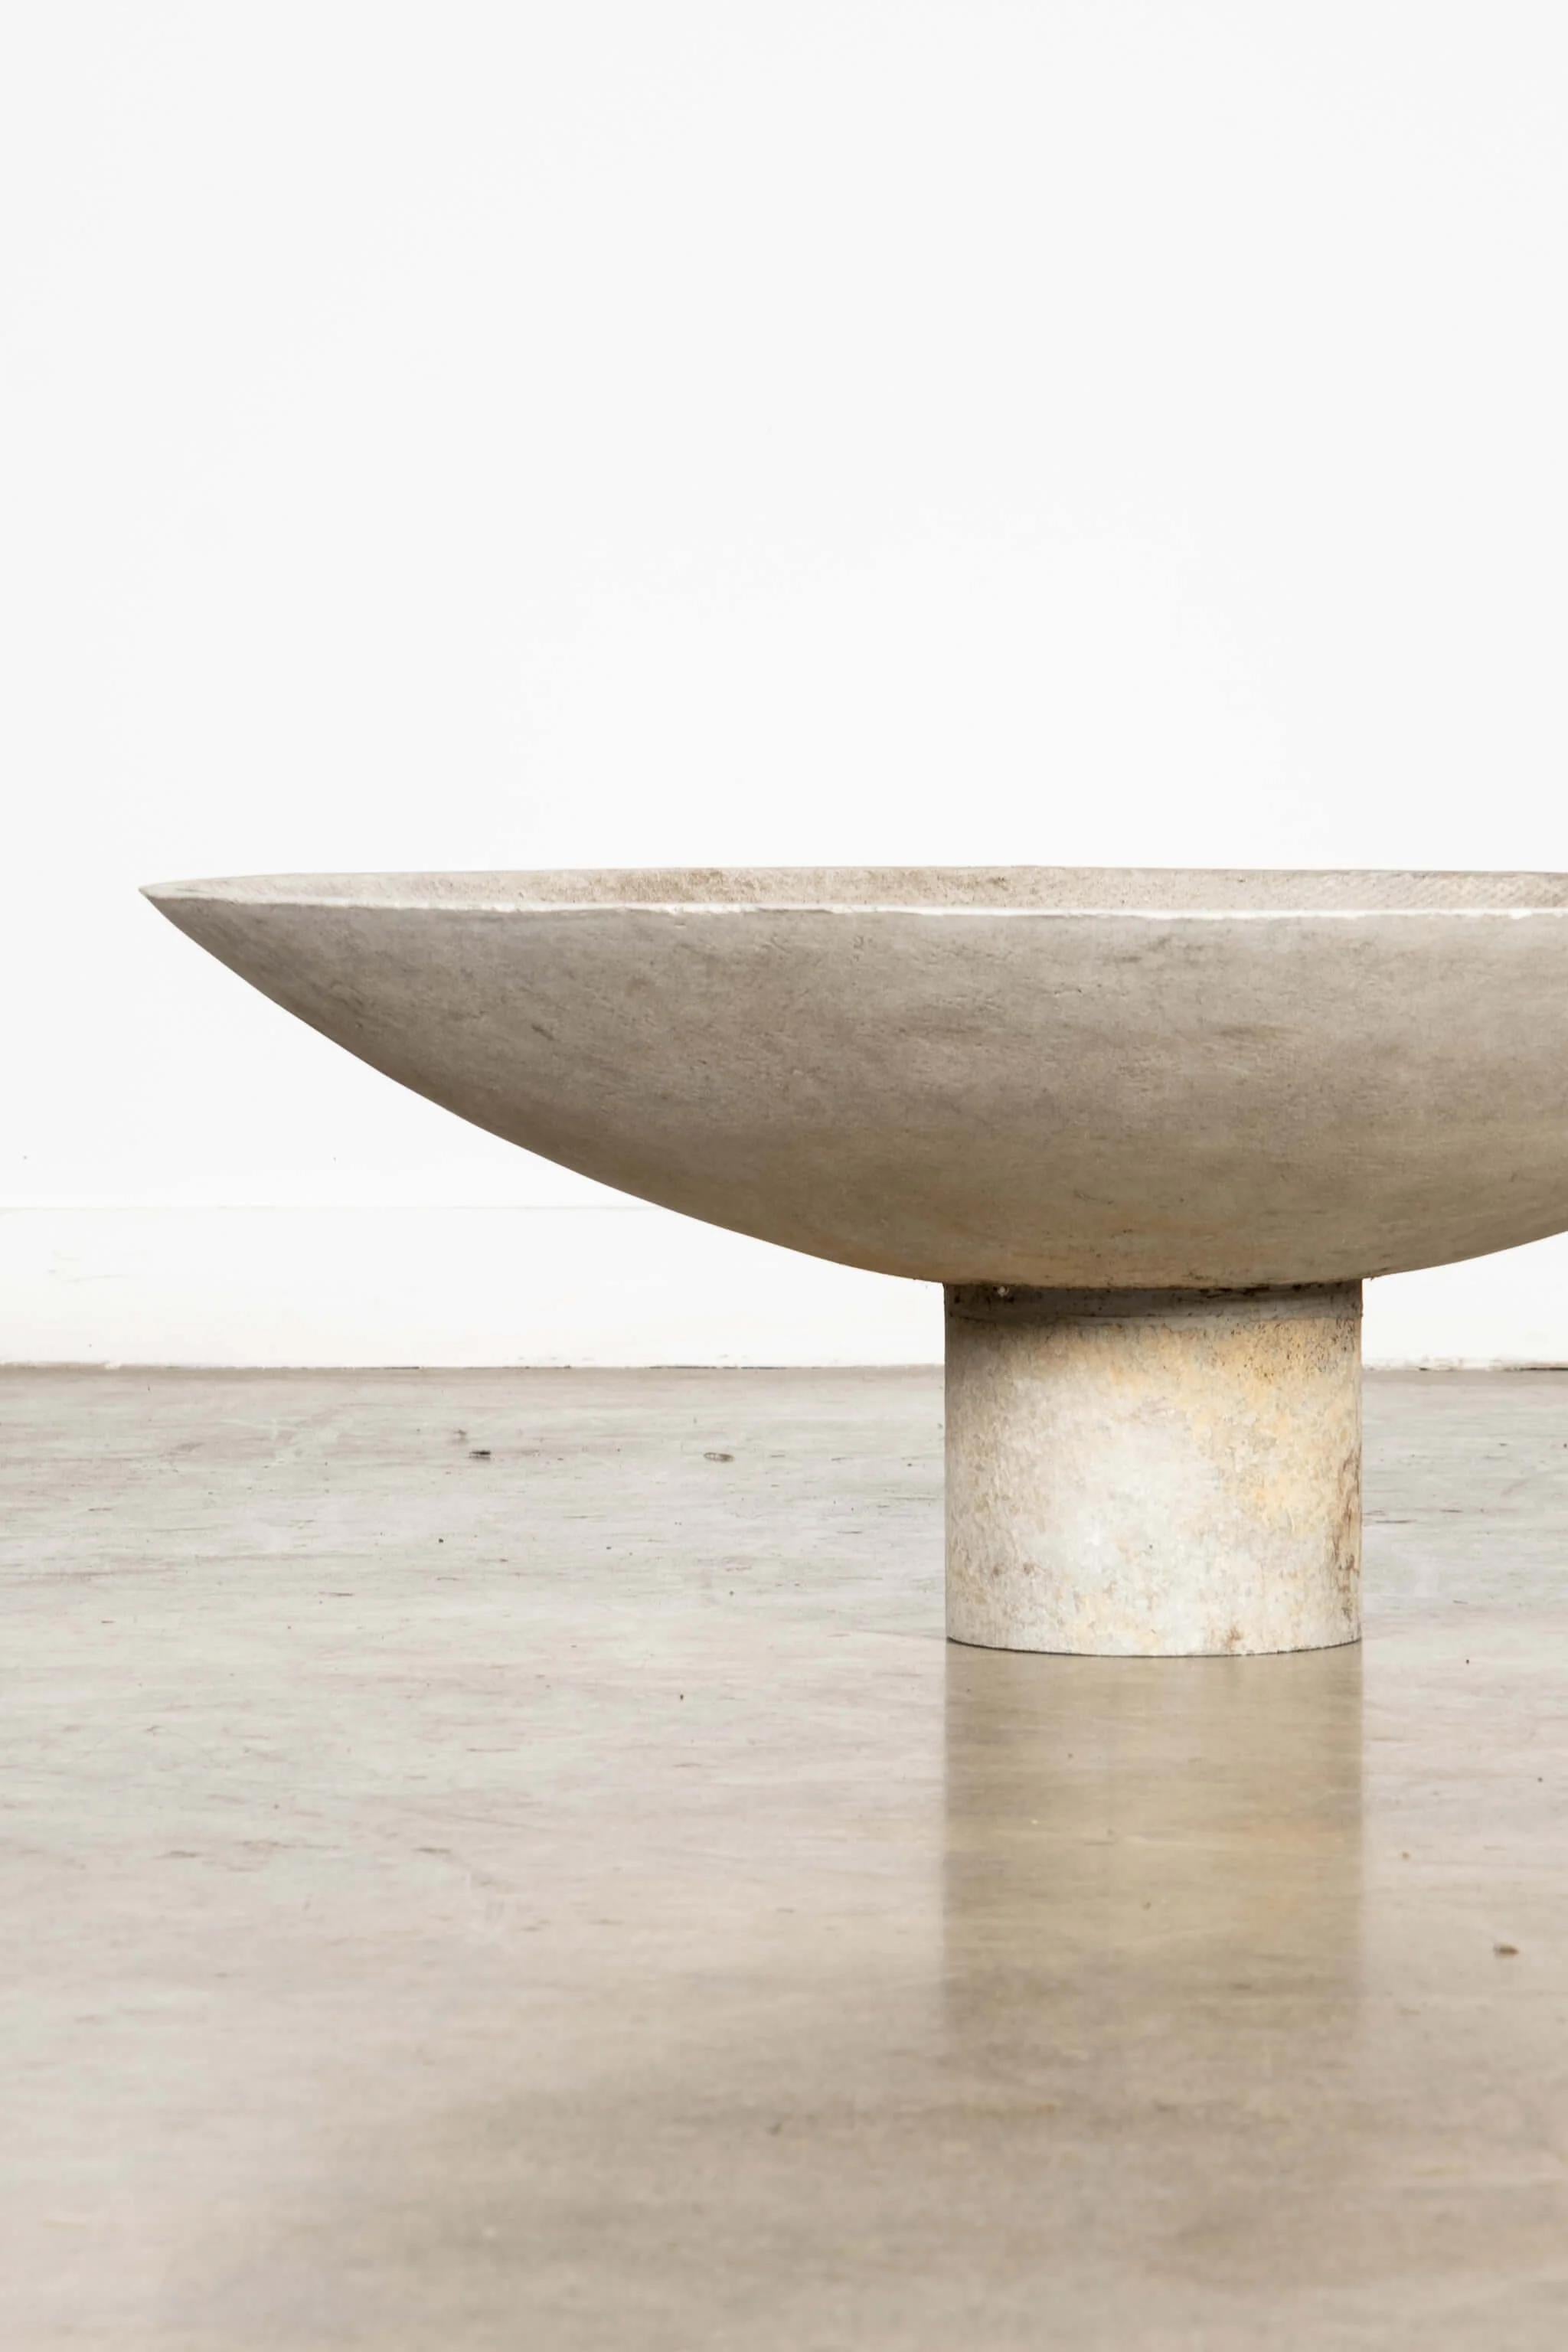 The large concrete composite saucer planter by Swiss architect Willy Guhl, provides a wide, low profile base for arrangements. Sculptural and suitable for indoor or outdoor use.

overall: 14.25